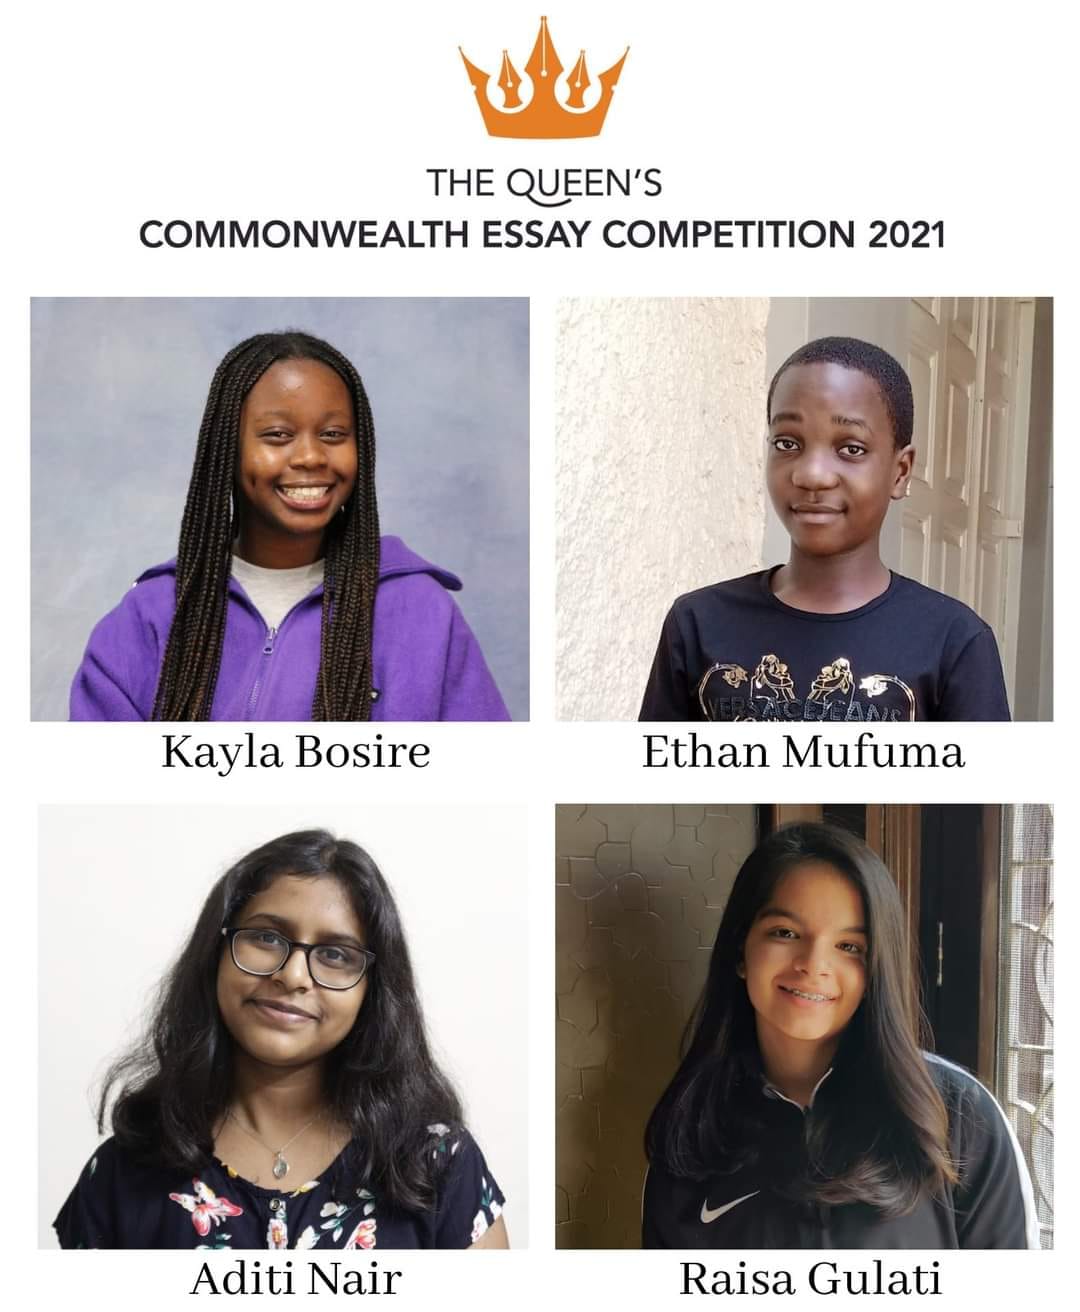 the queen's commonwealth essay competition 2021 results